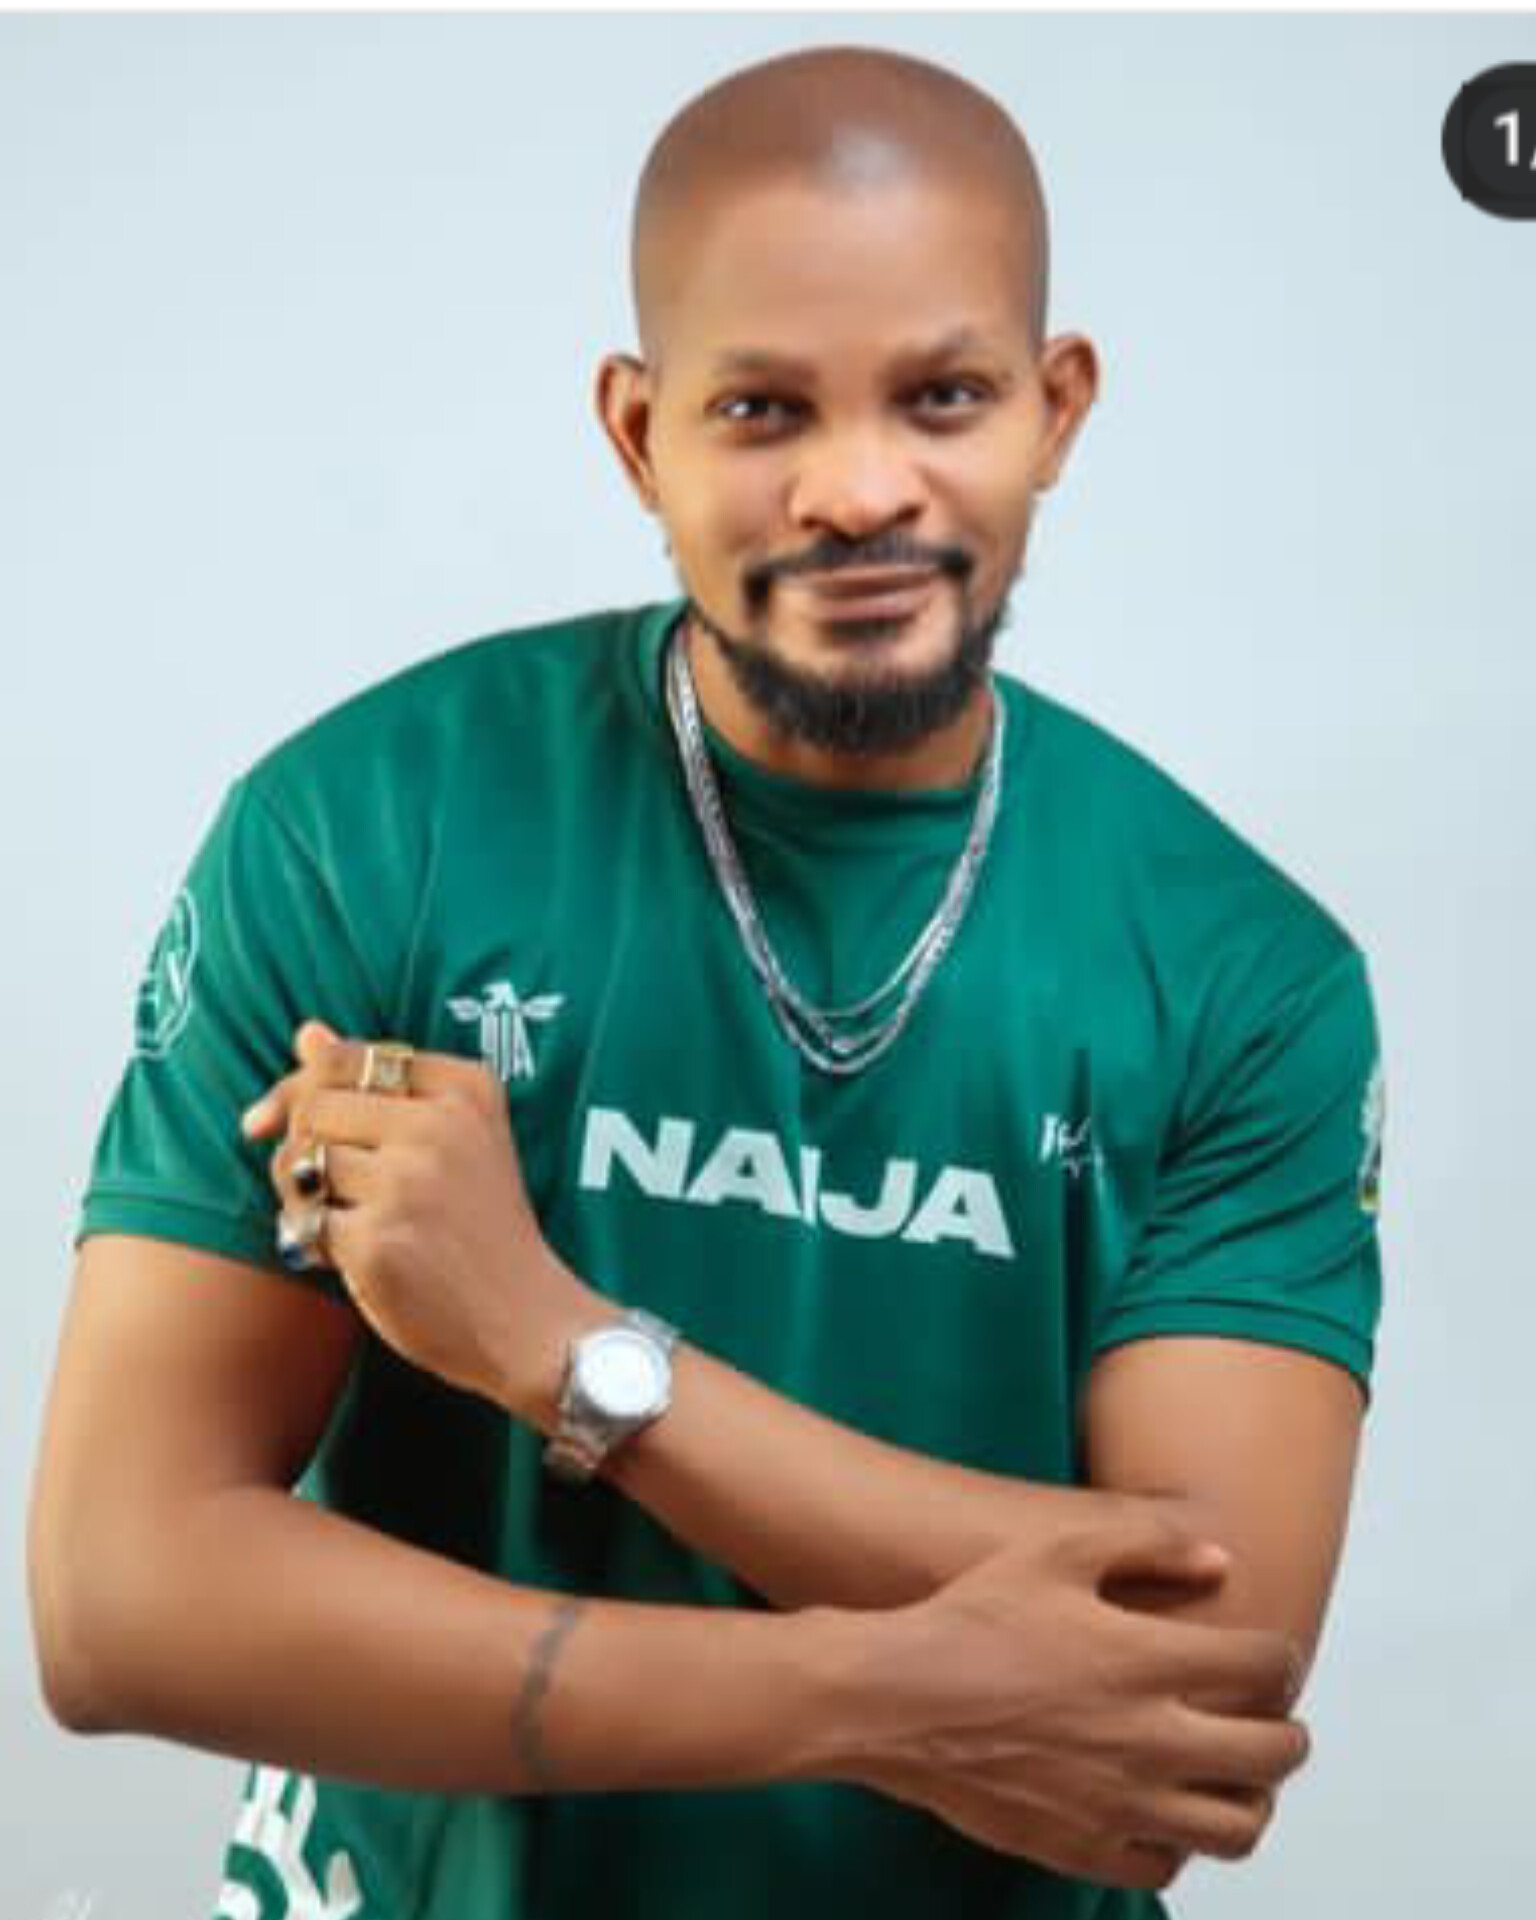 "Why Is It Taking Long To Give Us Names Of The Charity Wey Benefit From The 300 Million You Donate" — Uche Maduagwu Calls Out Davido